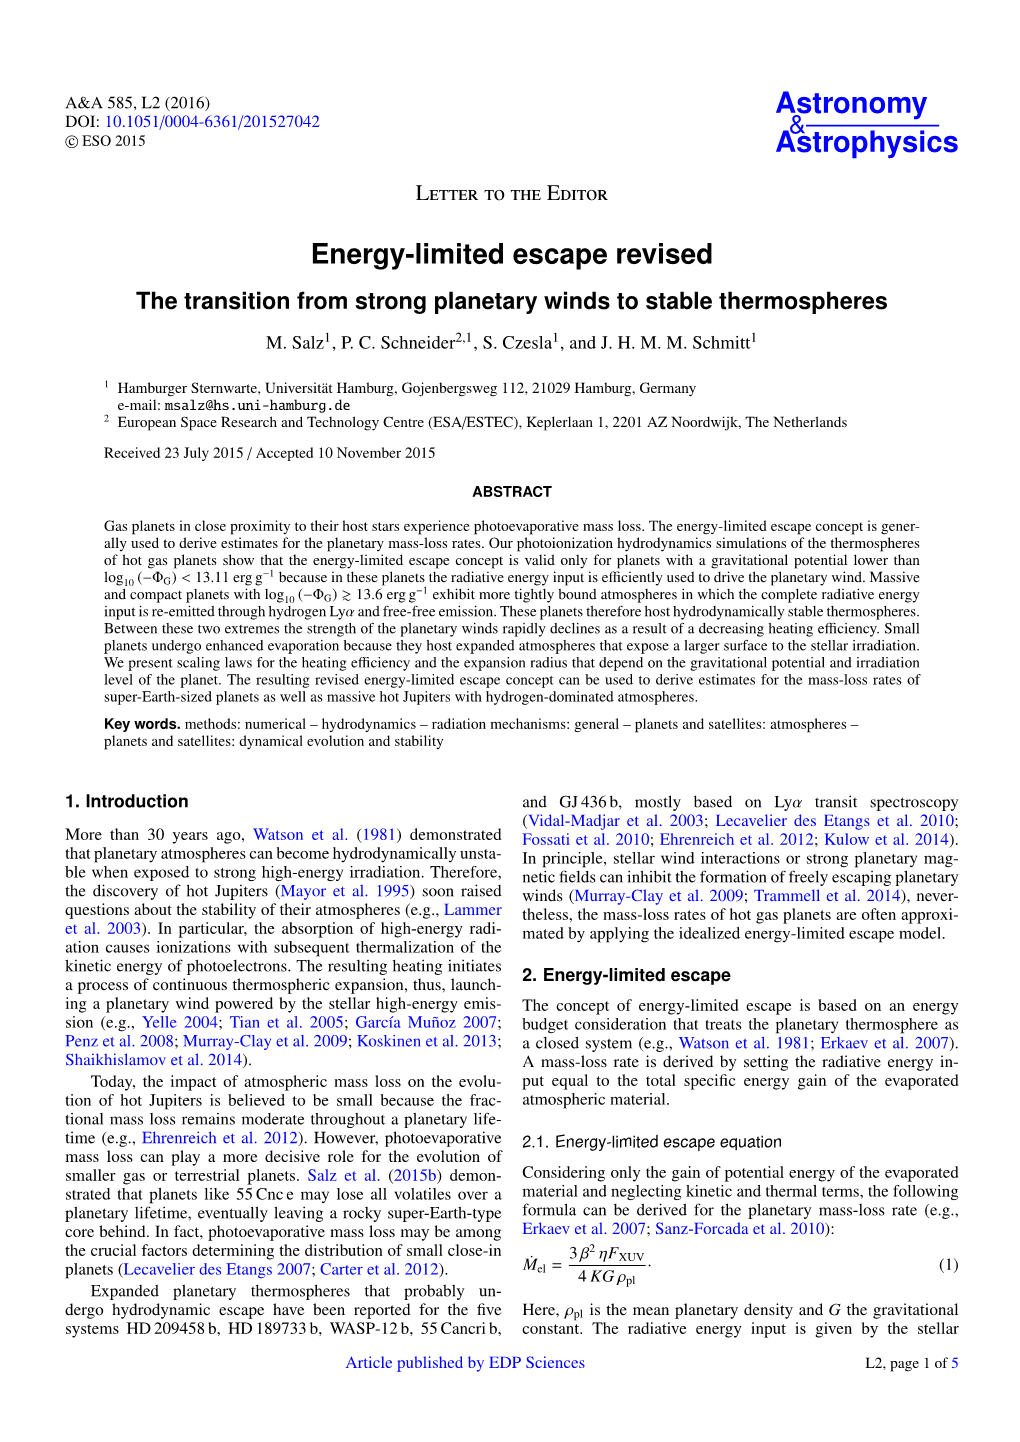 Energy-Limited Escape Revised the Transition from Strong Planetary Winds to Stable Thermospheres